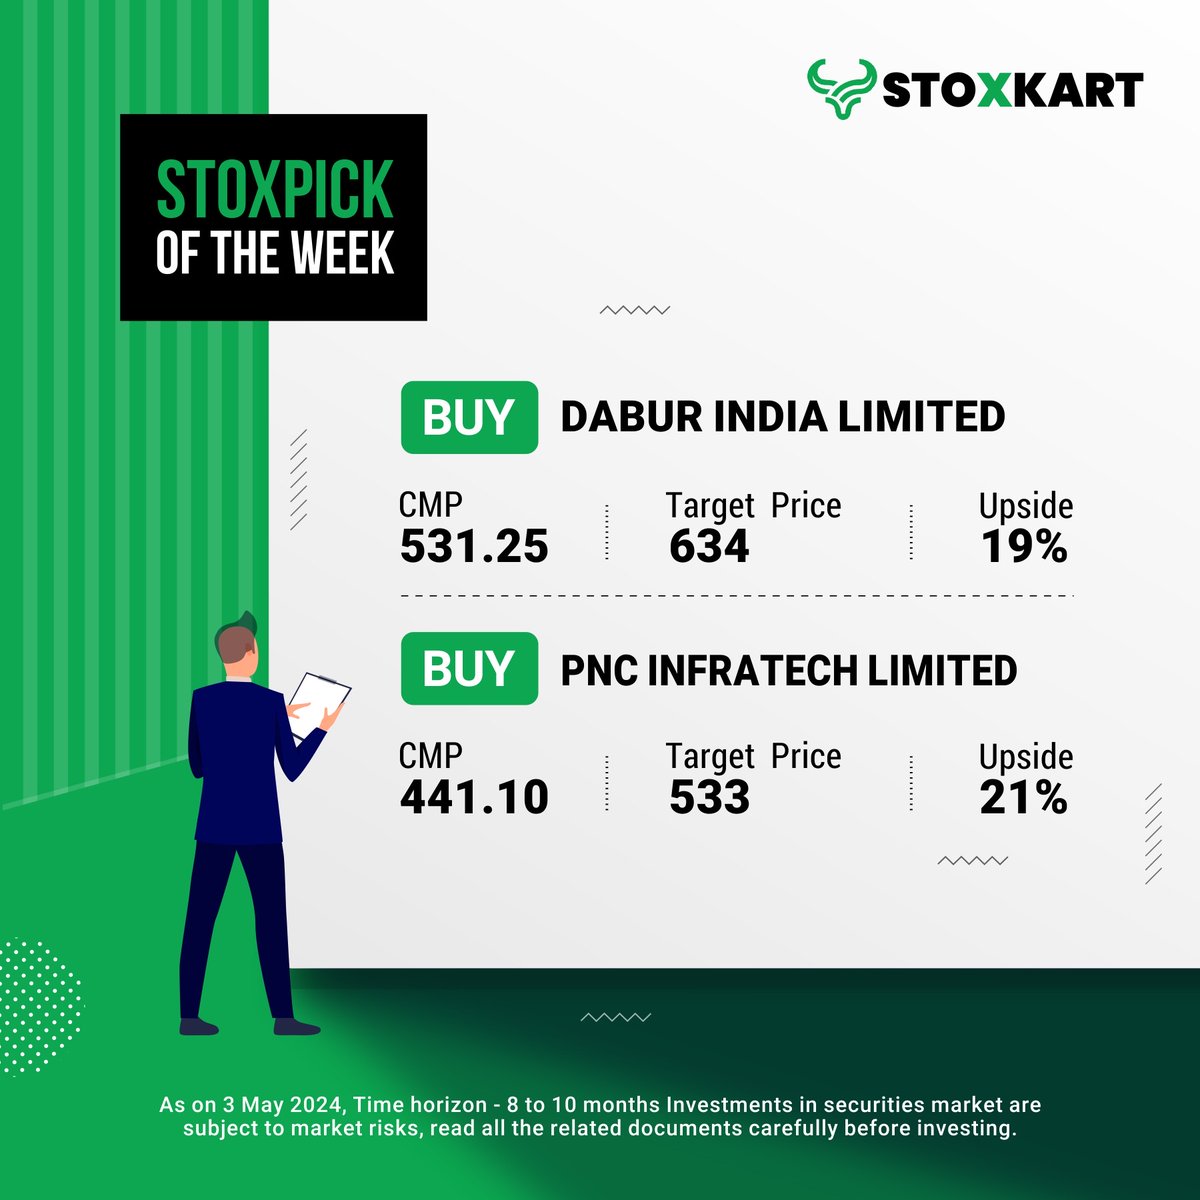 Featuring fundamental #stoxkpick of the week to enhance your portfolio’s strength!

#Stoxkart #StoxkartApp #TradeWithStoxkart #InvestWithStoxkart #StockMarketUpdate #StockMarket #Investing #Trading #Stocks #StockNews #Finance #Investment #DayTrading #StockMarketNews